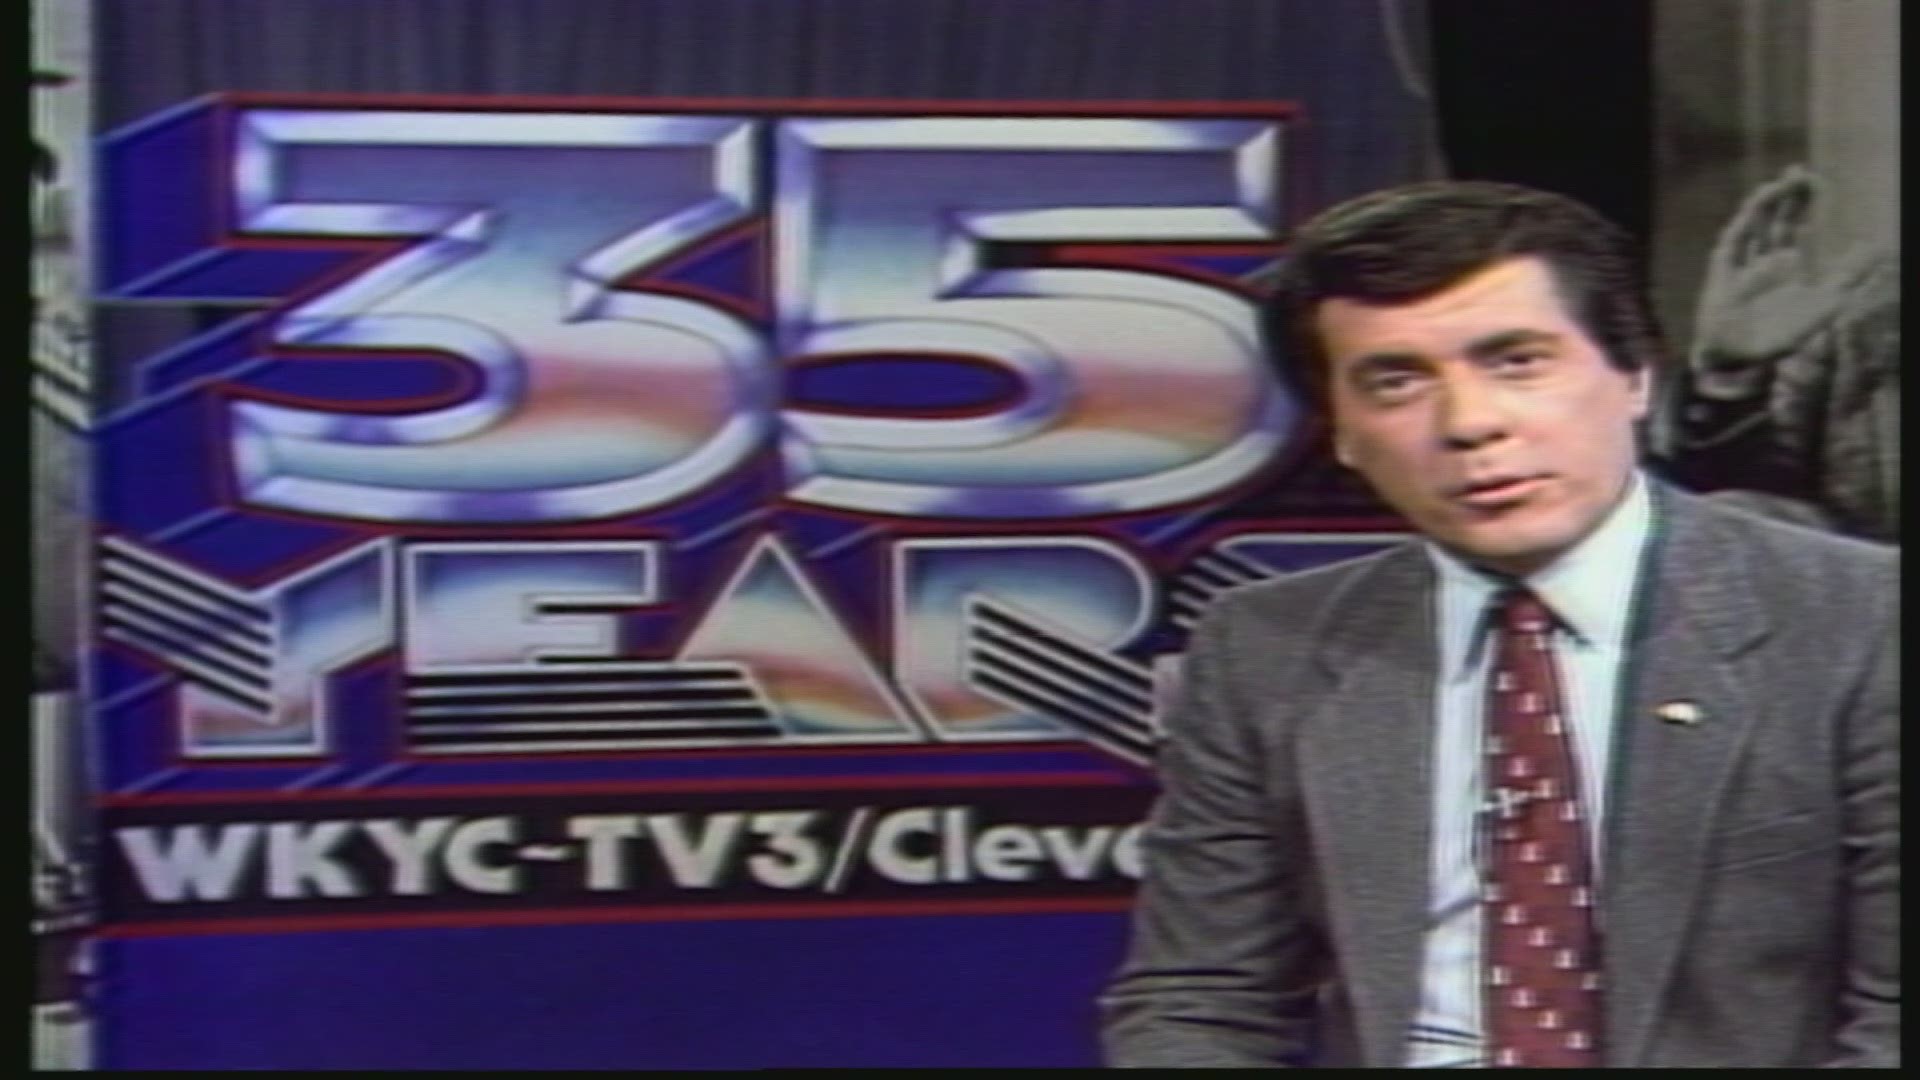 70 moments in WKYC history: Channel 3 becomes WKYC and is colorized